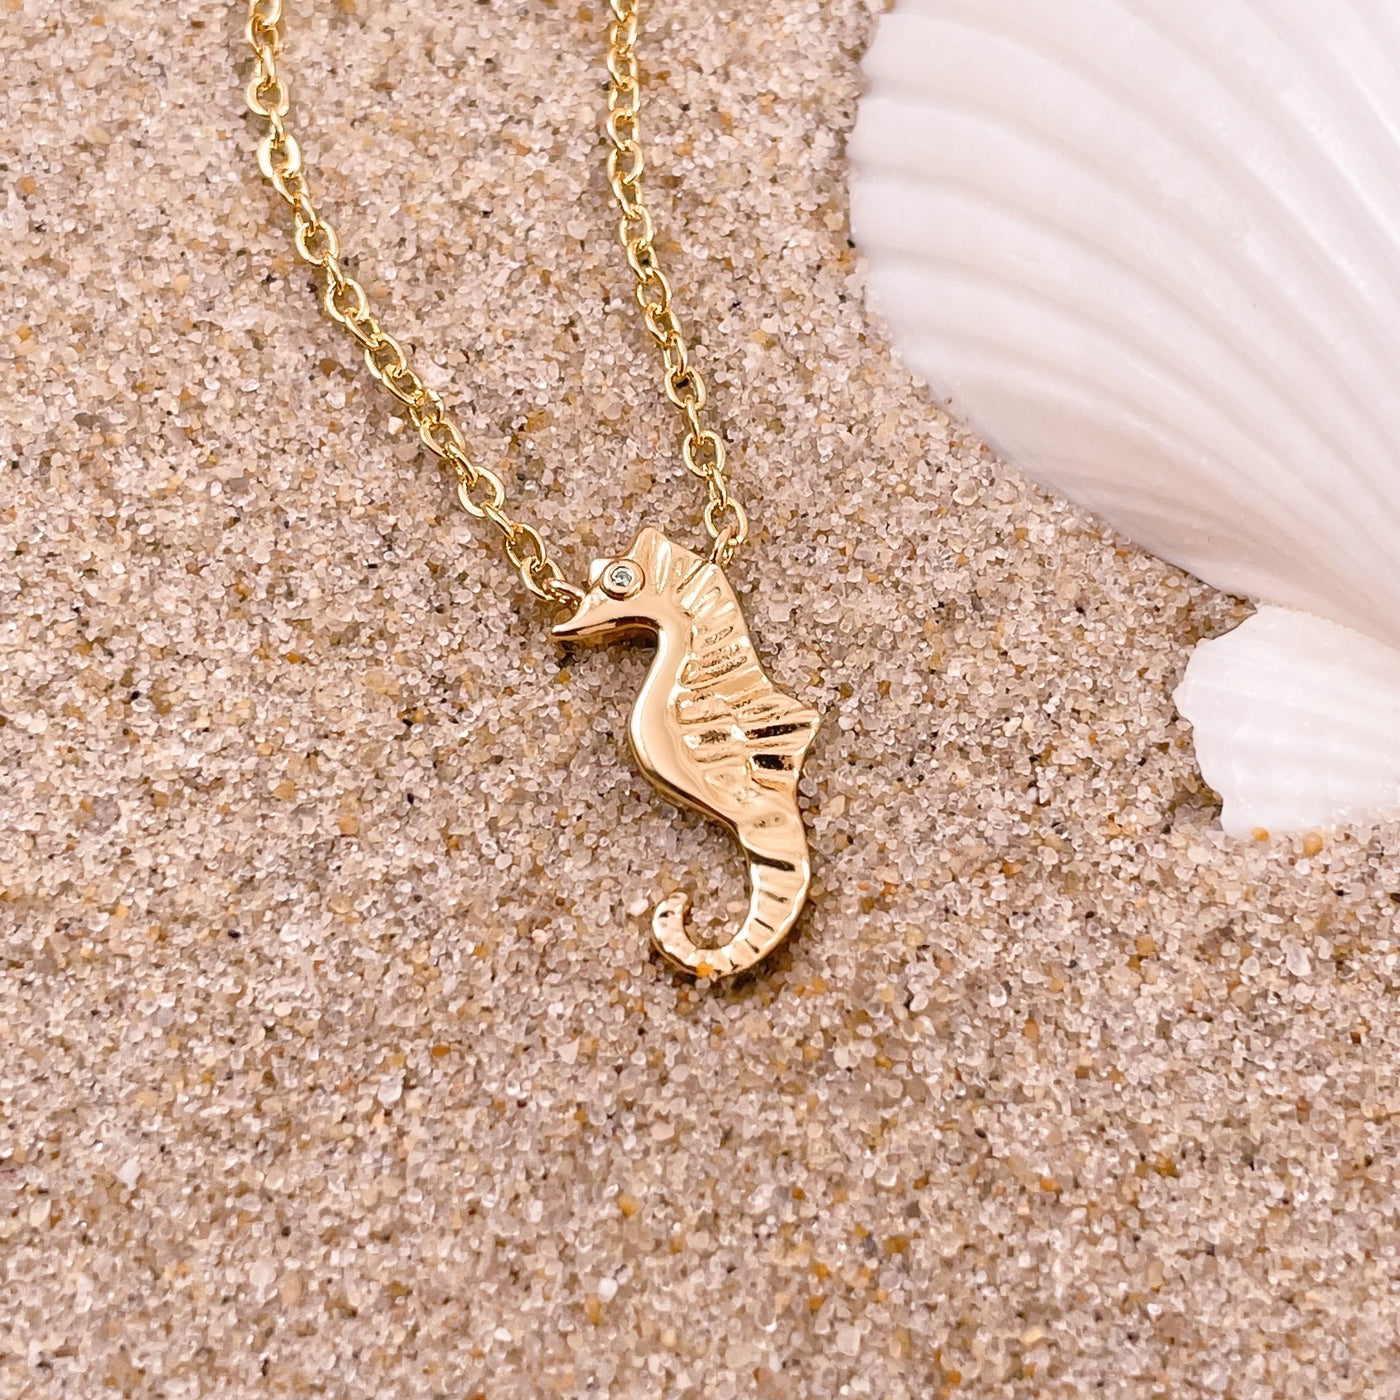 Hanging Gold Seahorse Necklace